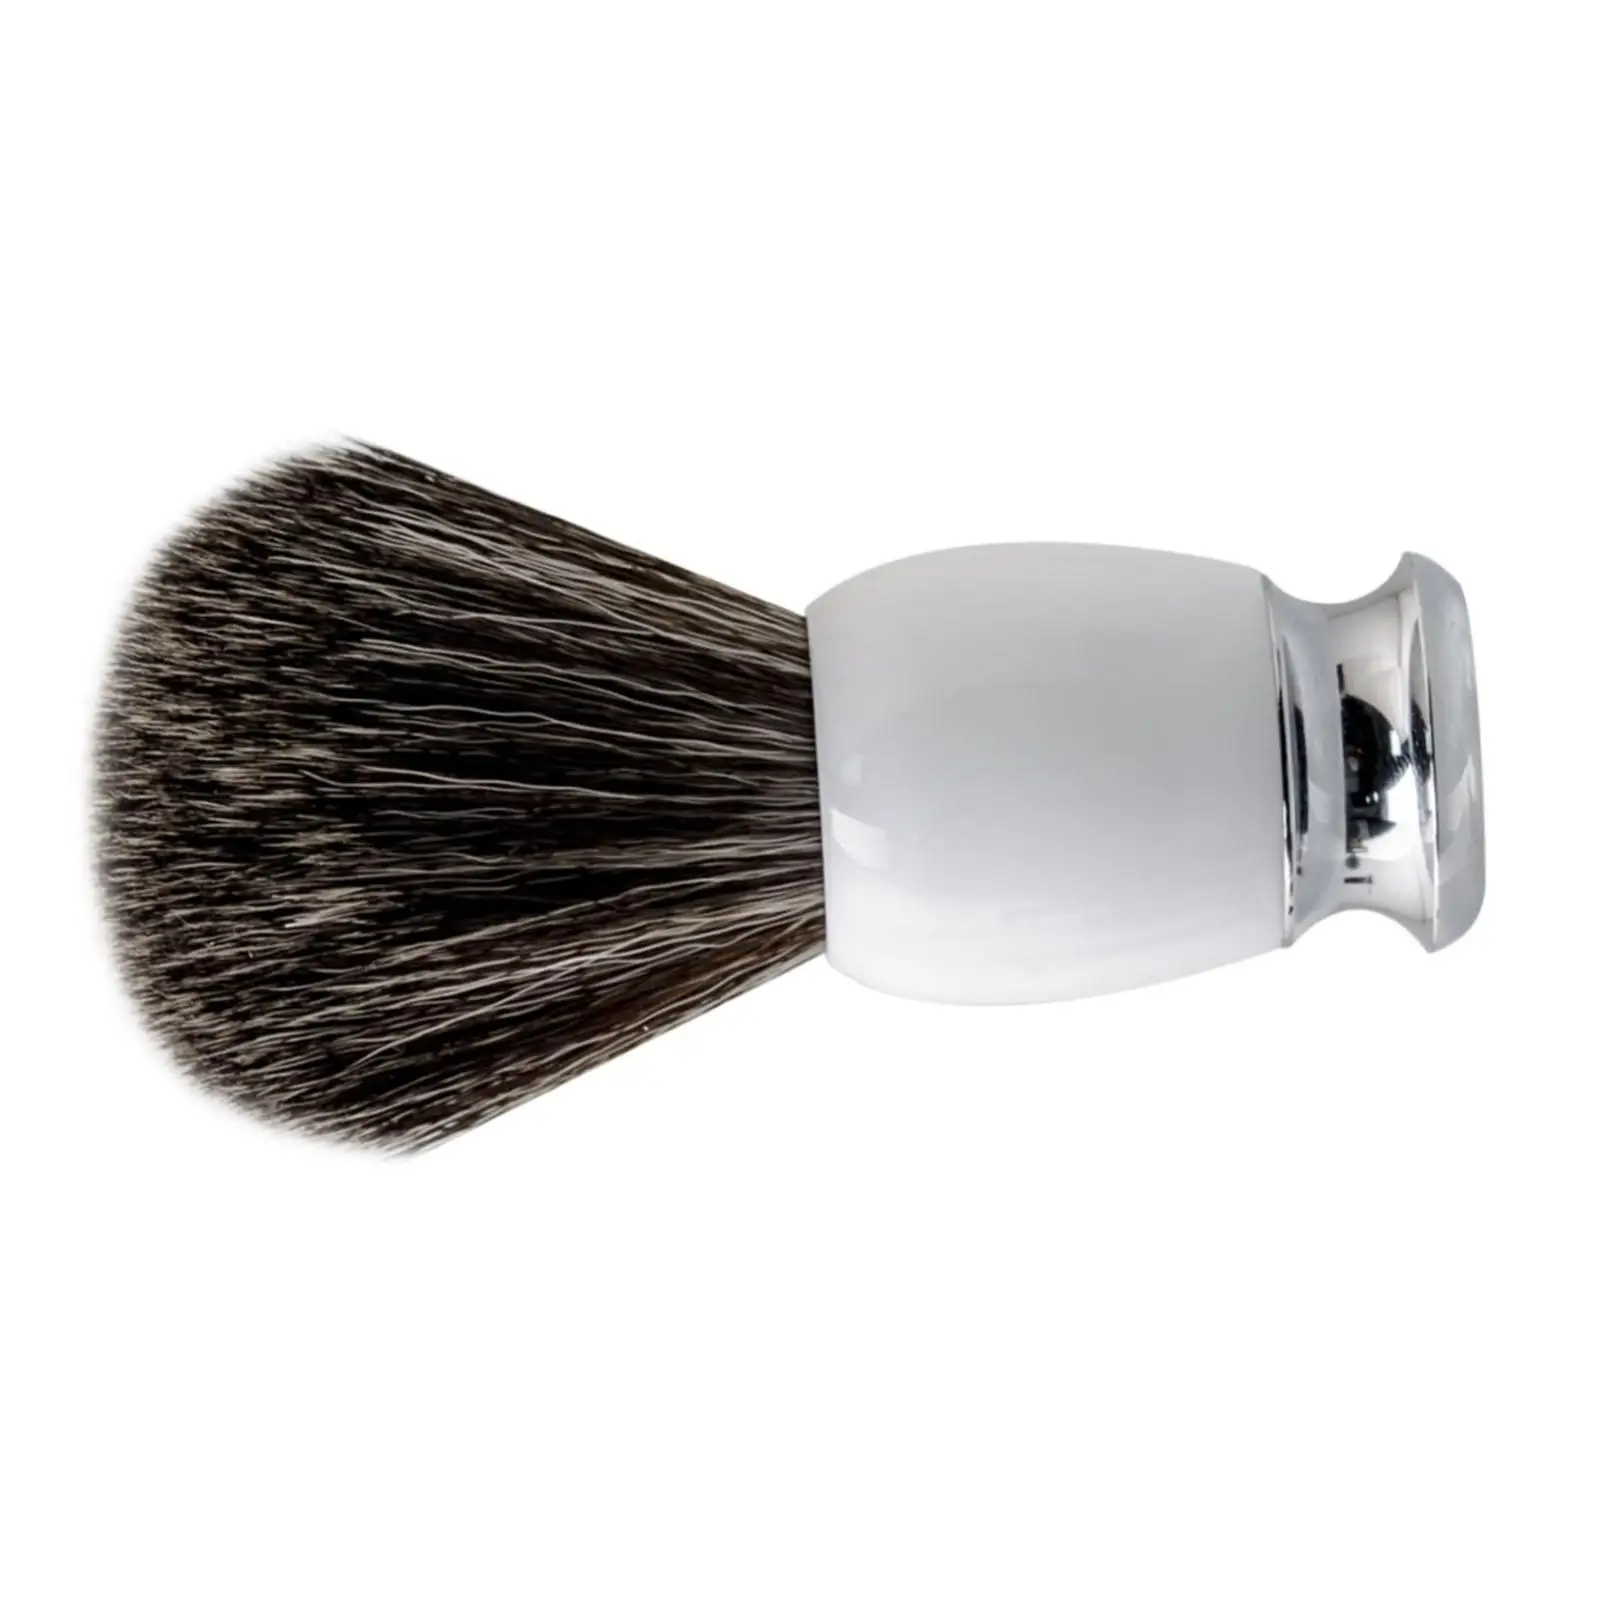 Shaving Brush Beard Brush Classic Hand Crafted Soap Brush Rich Lather for Dad Boyfriend Barber Shave Brush Facial Beard Cleaning